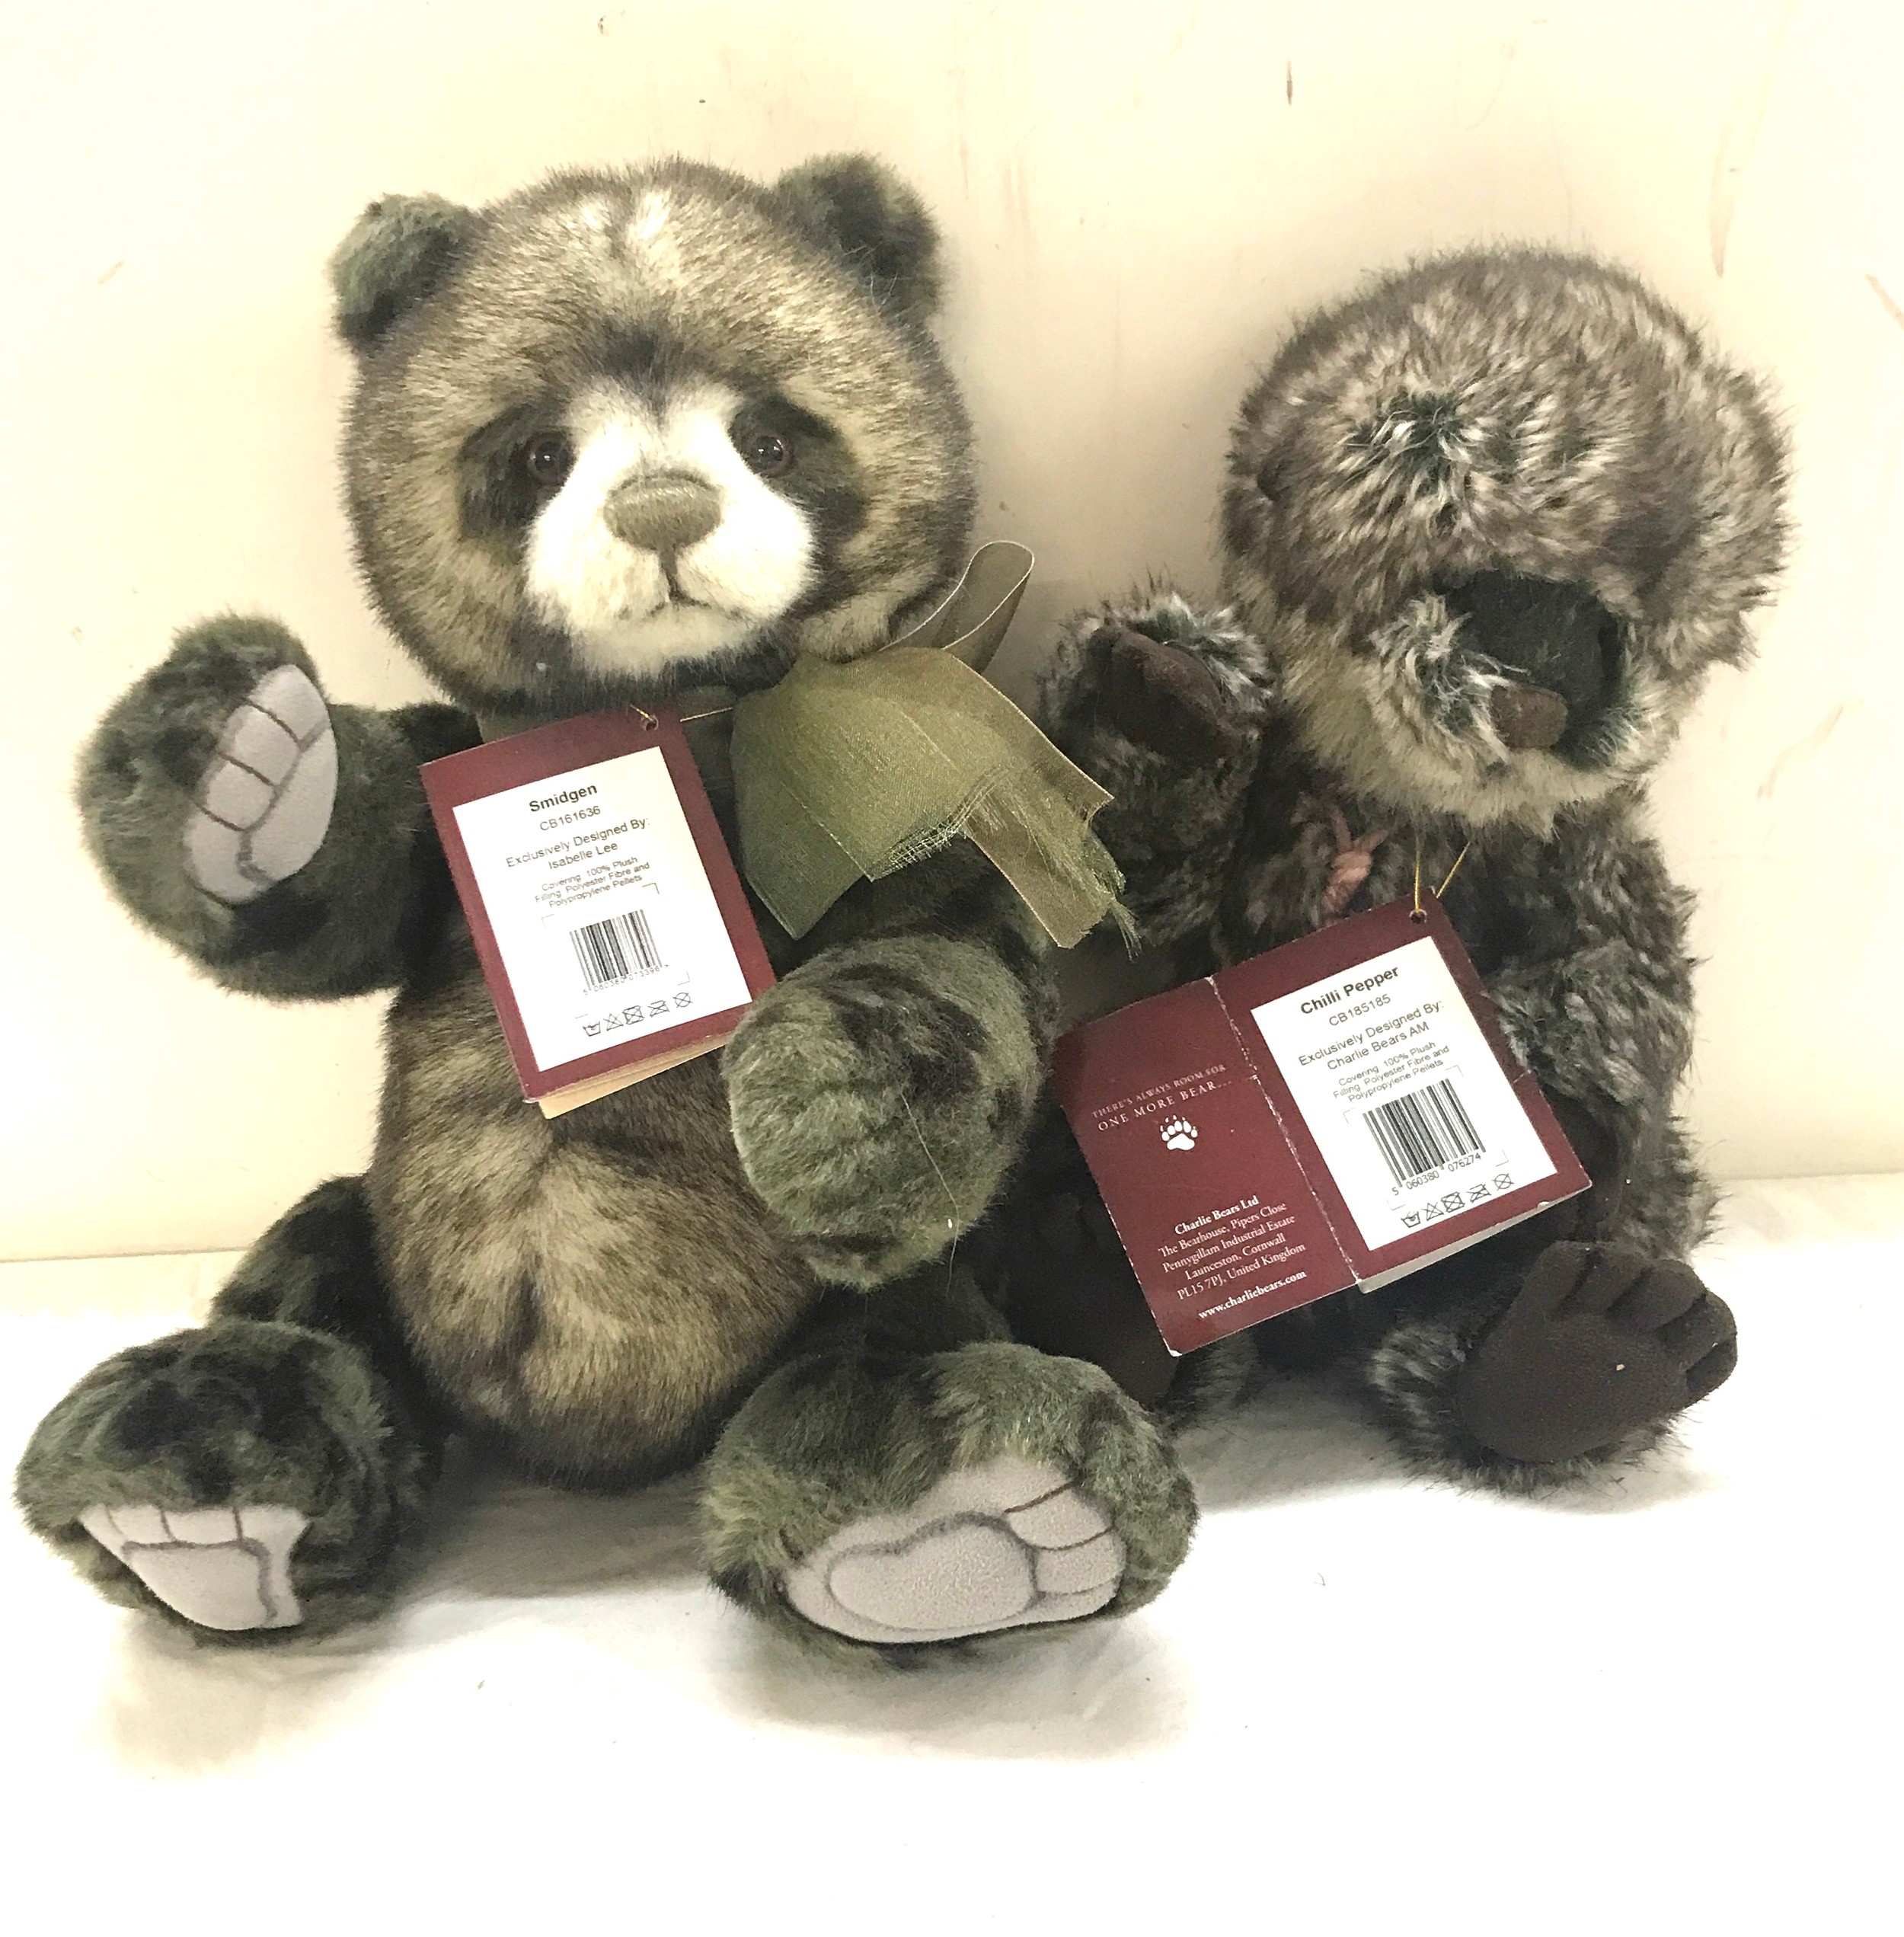 2 Charlie Bears Smidgen and Chilli Pepper, both with tags